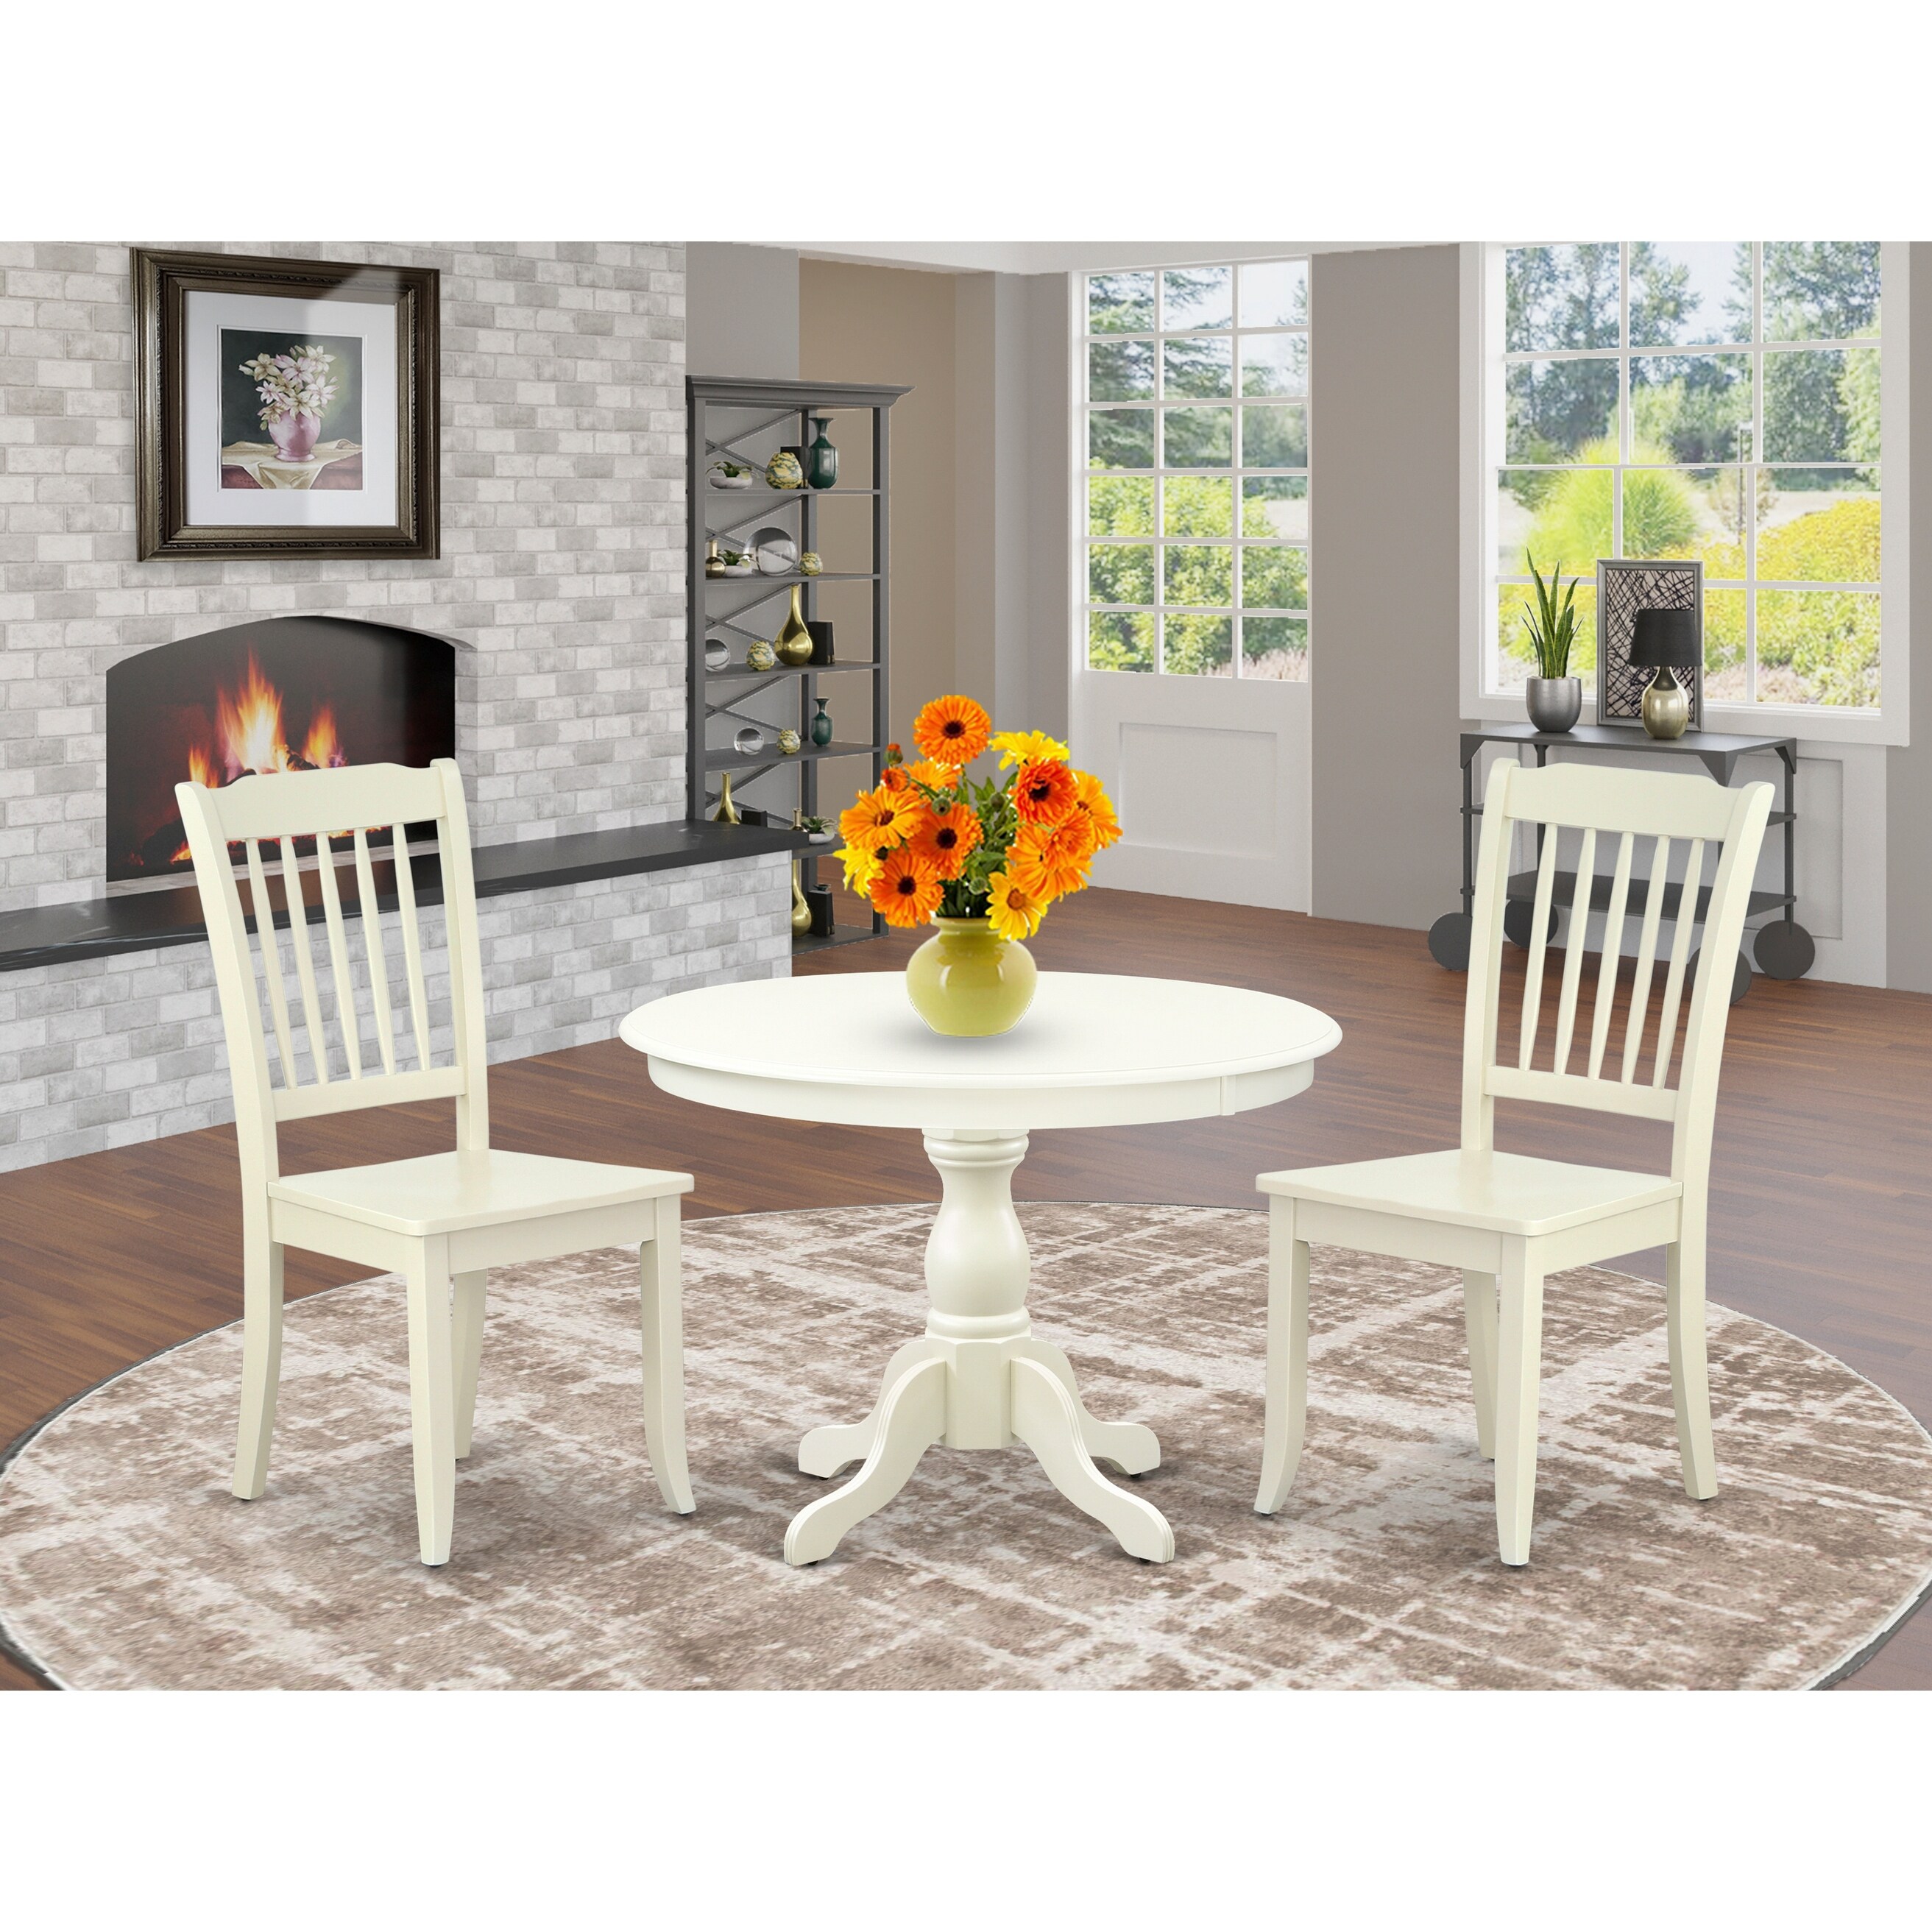 East West Furniture 3 Pc Kitchen Set Includes Wood Table With 2 Chairs For Dining Room -(finish and Seats Type Options)